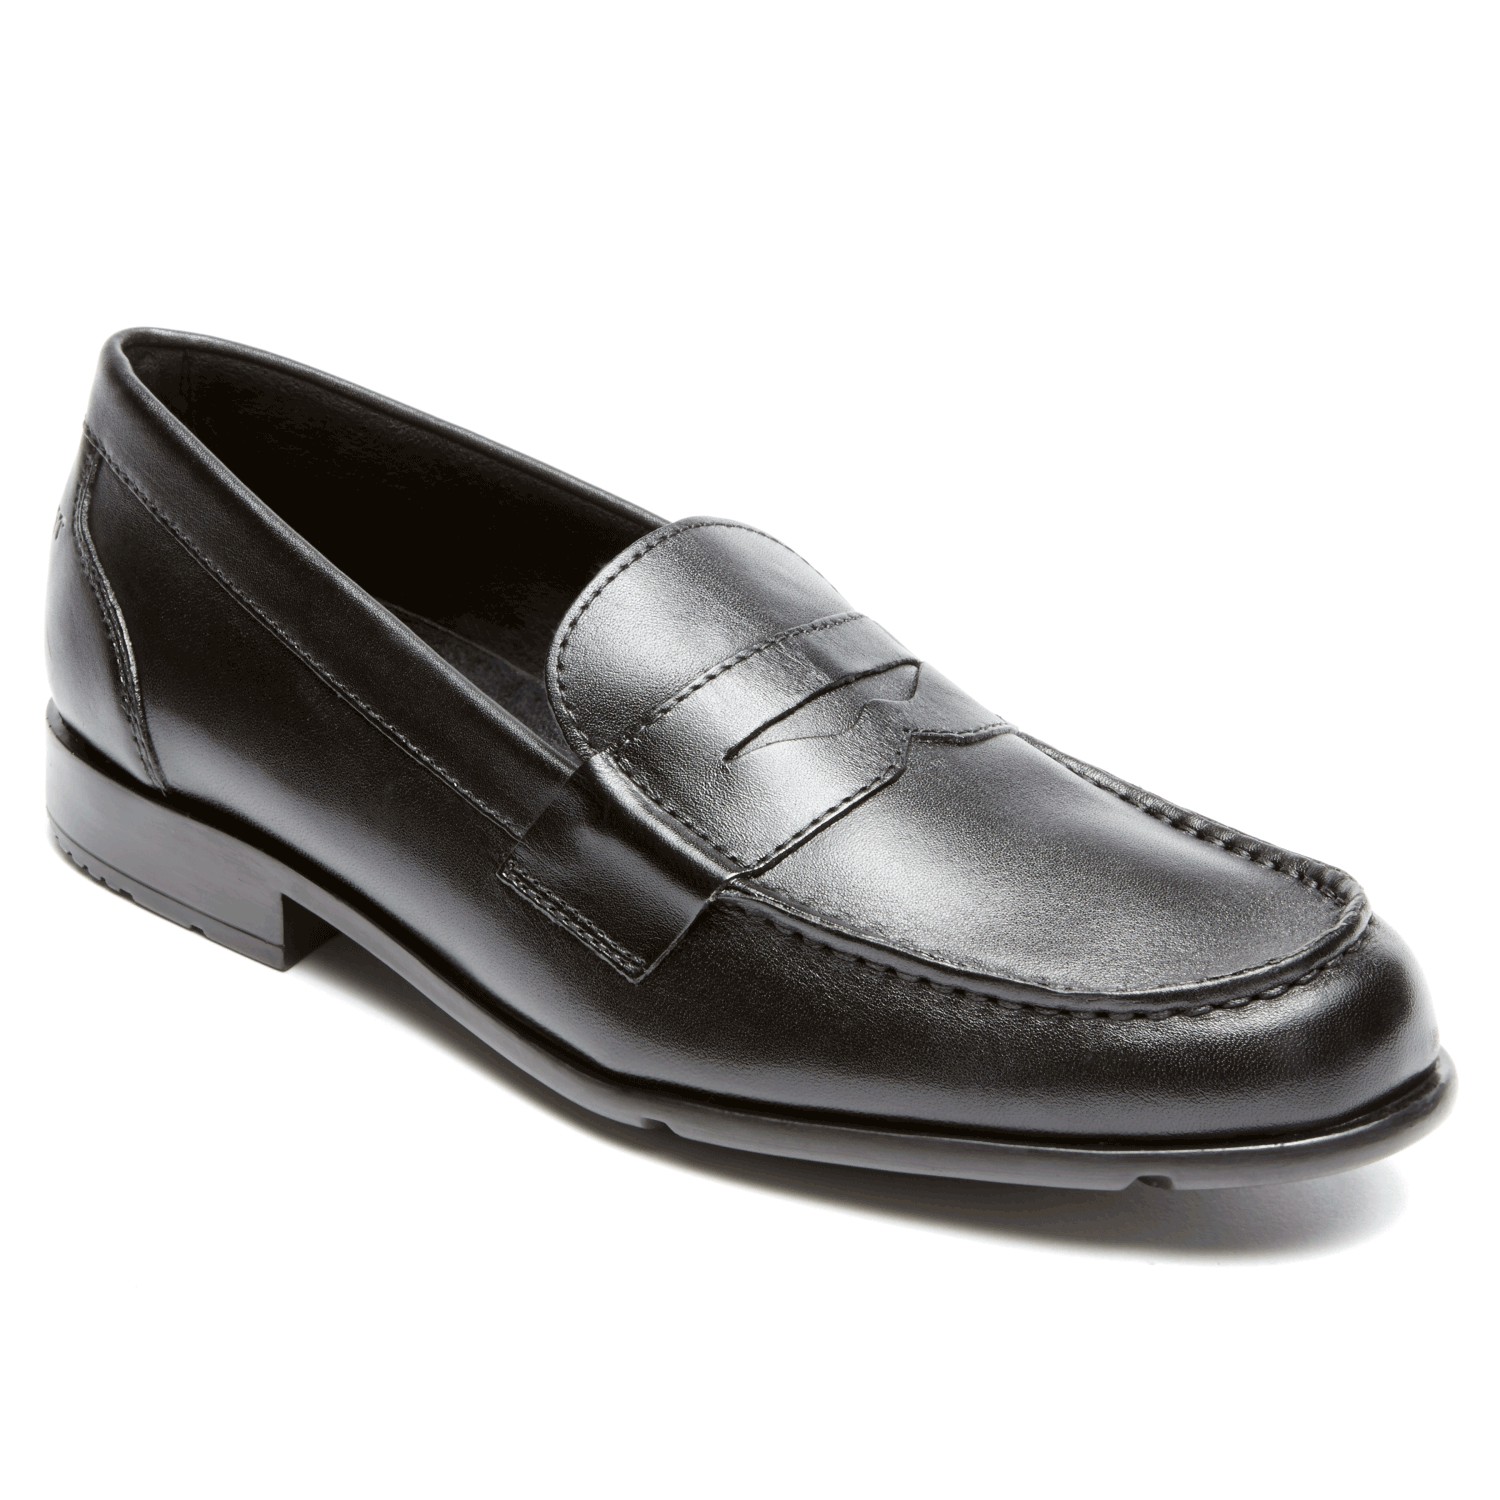 rockport shoes penny loafers